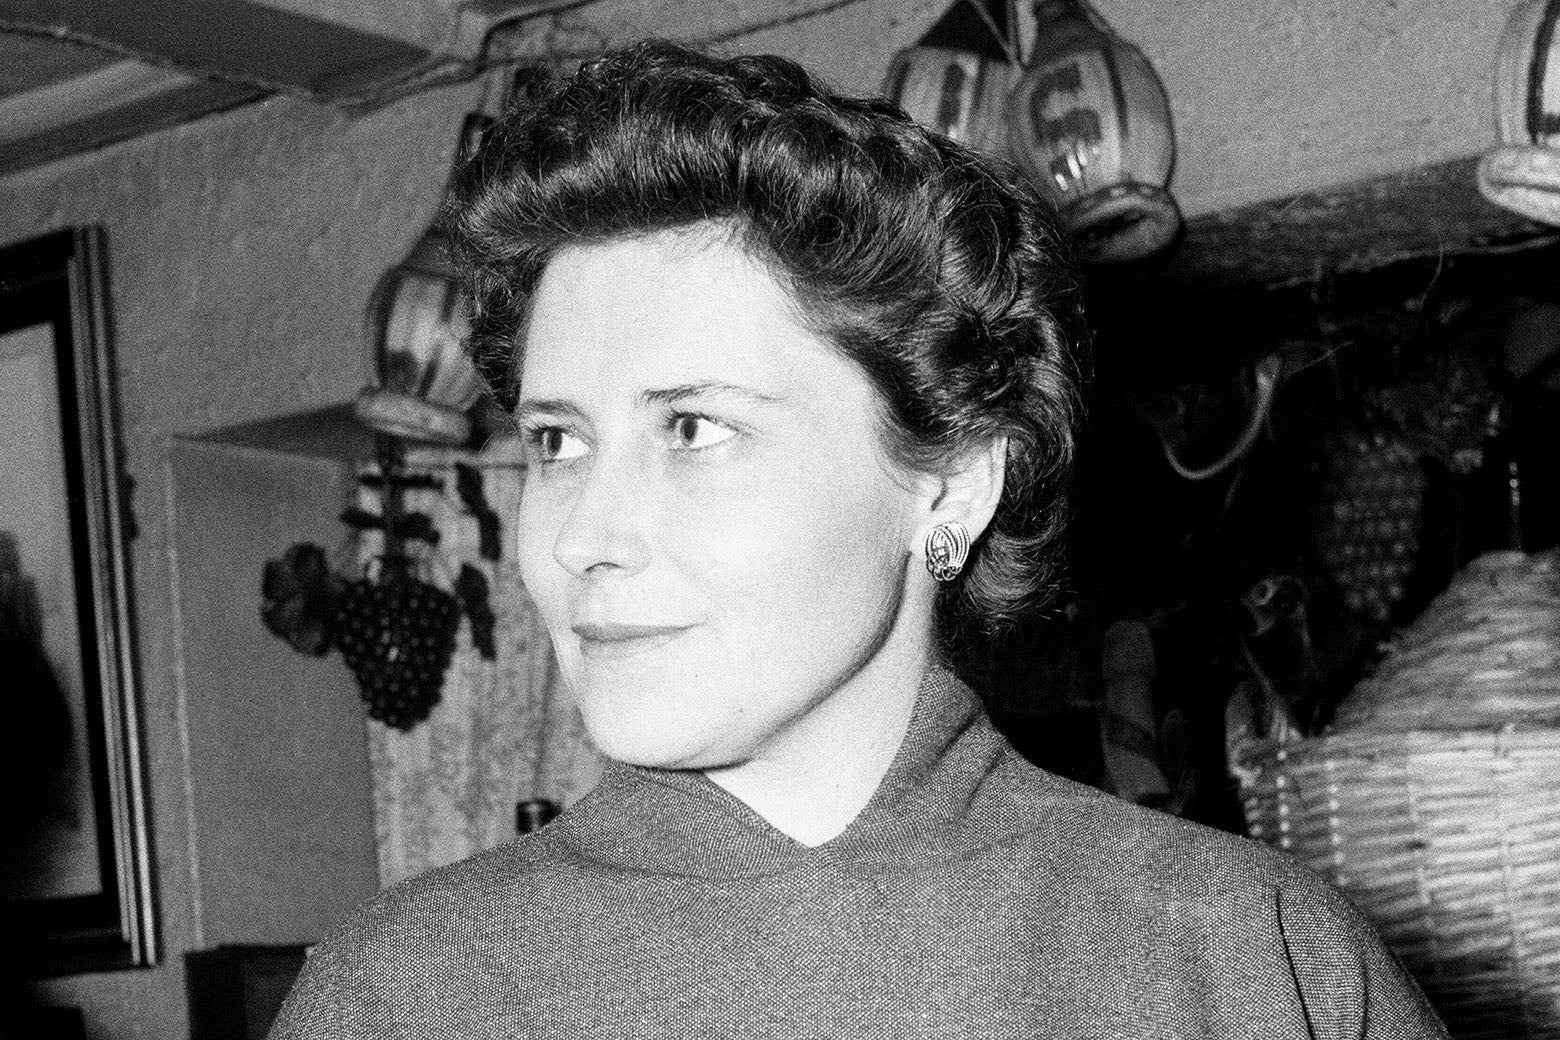 Black and white photo of a slightly smiling Lessing standing in what appears to be a kitchen